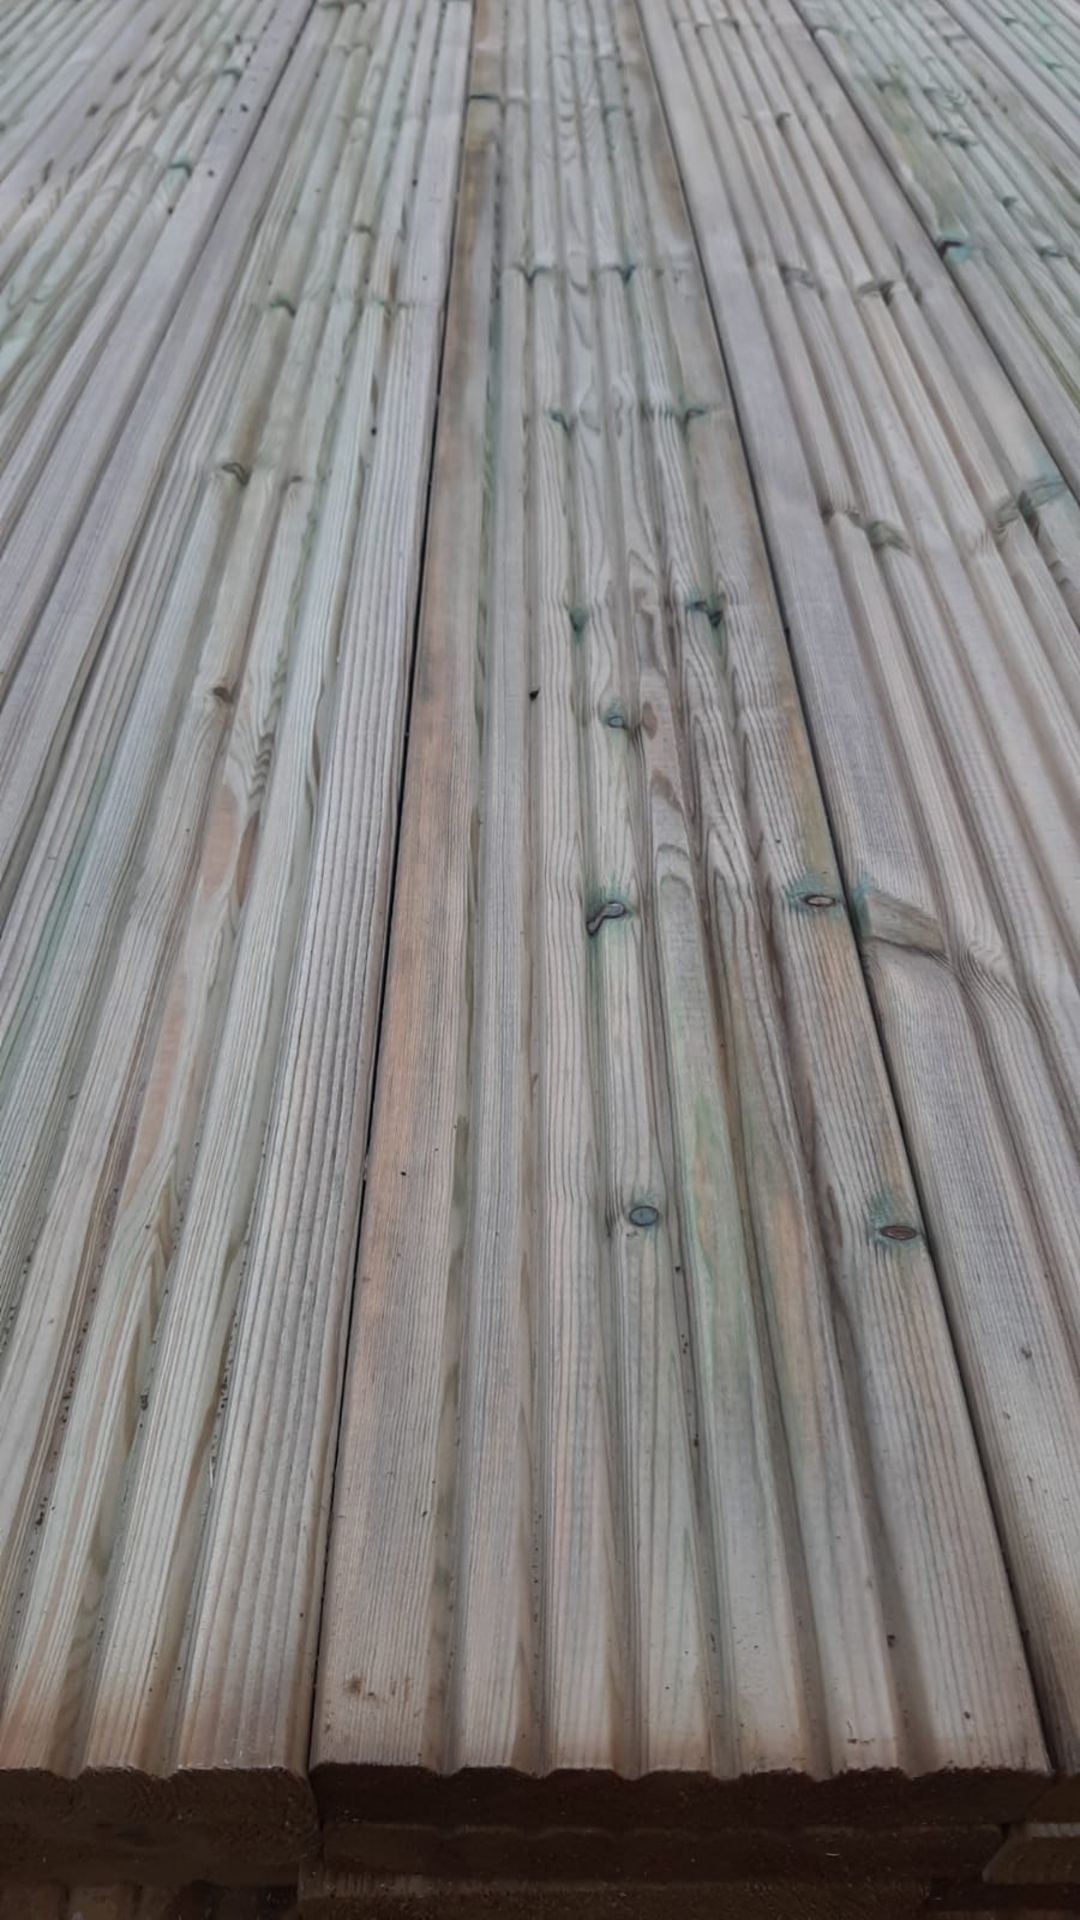 DECKING ALL NEW 20 BOARDS SIZE 4200 X 120 X 28MM *NO VAT*